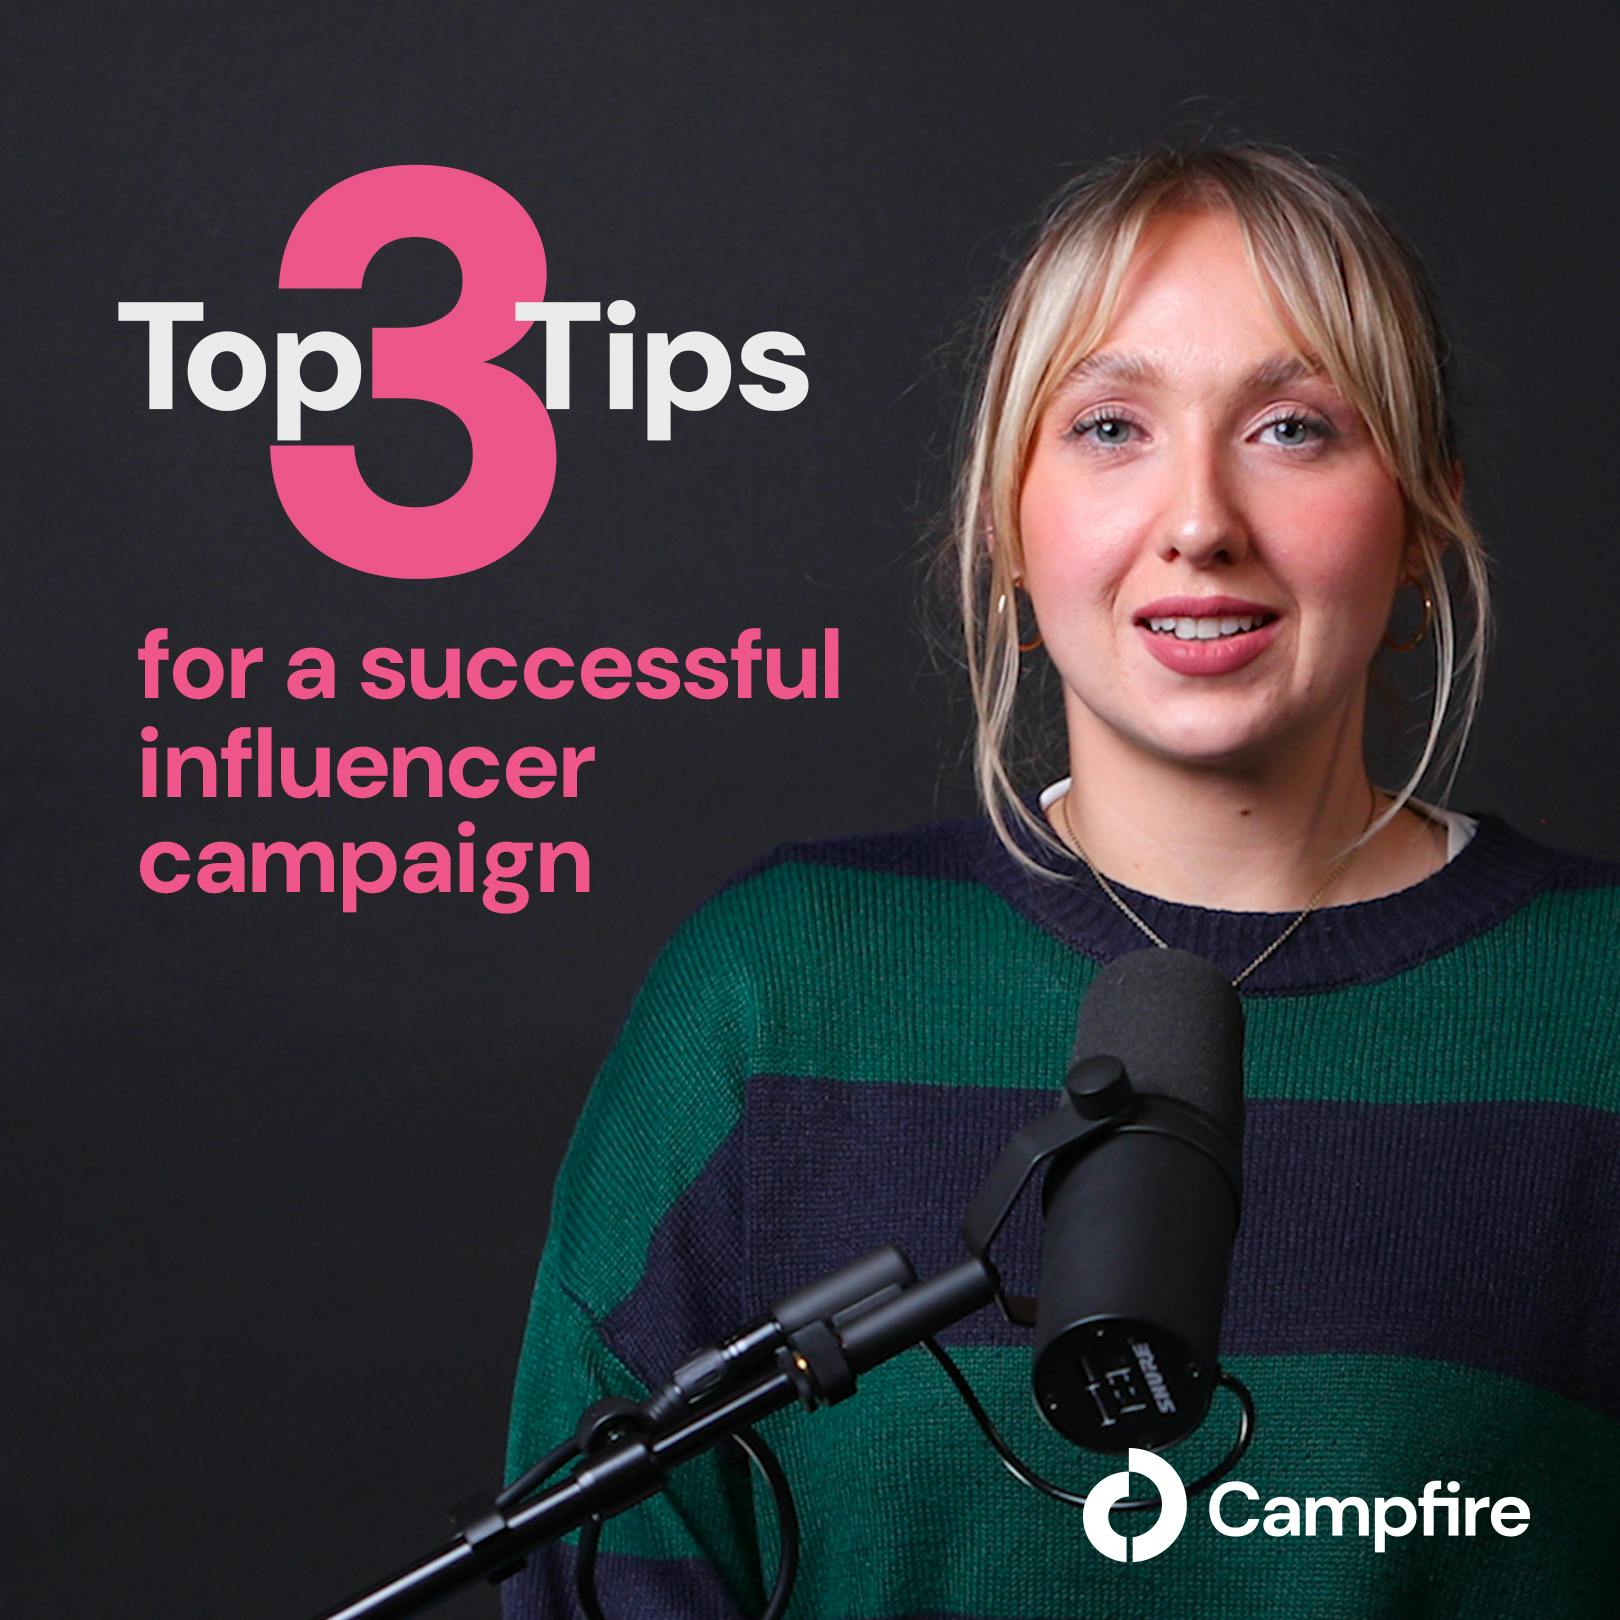 Top 3 Tips For a Successful Influencer Campaign